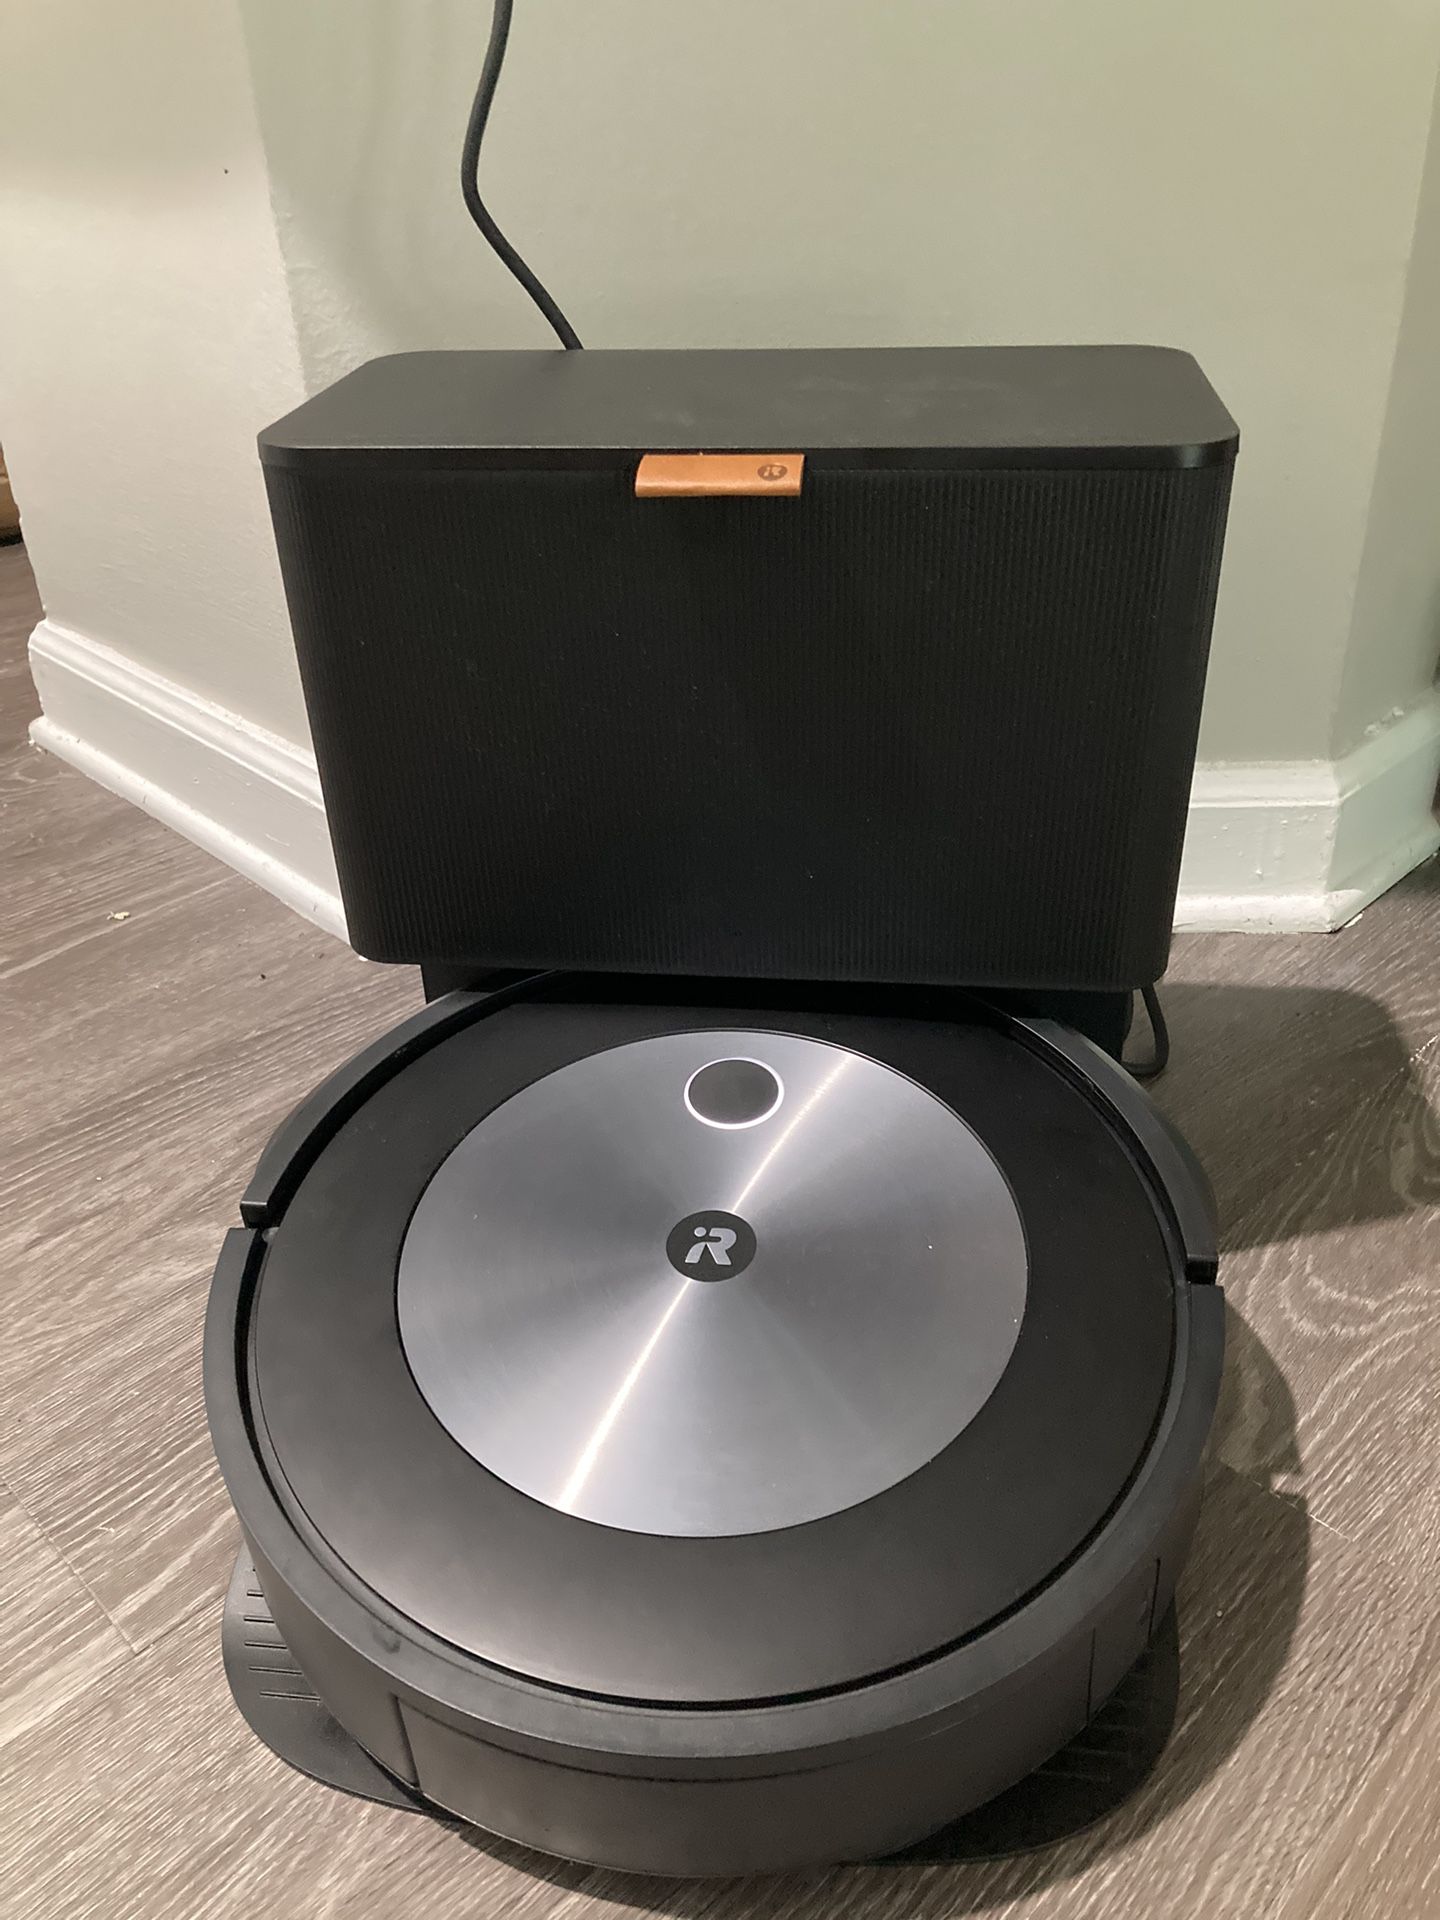 iRobot Roomba j7 (7150) Wi-Fi Connected Robot Vacuum - Identifies and avoids Obstacles Like pet Wast